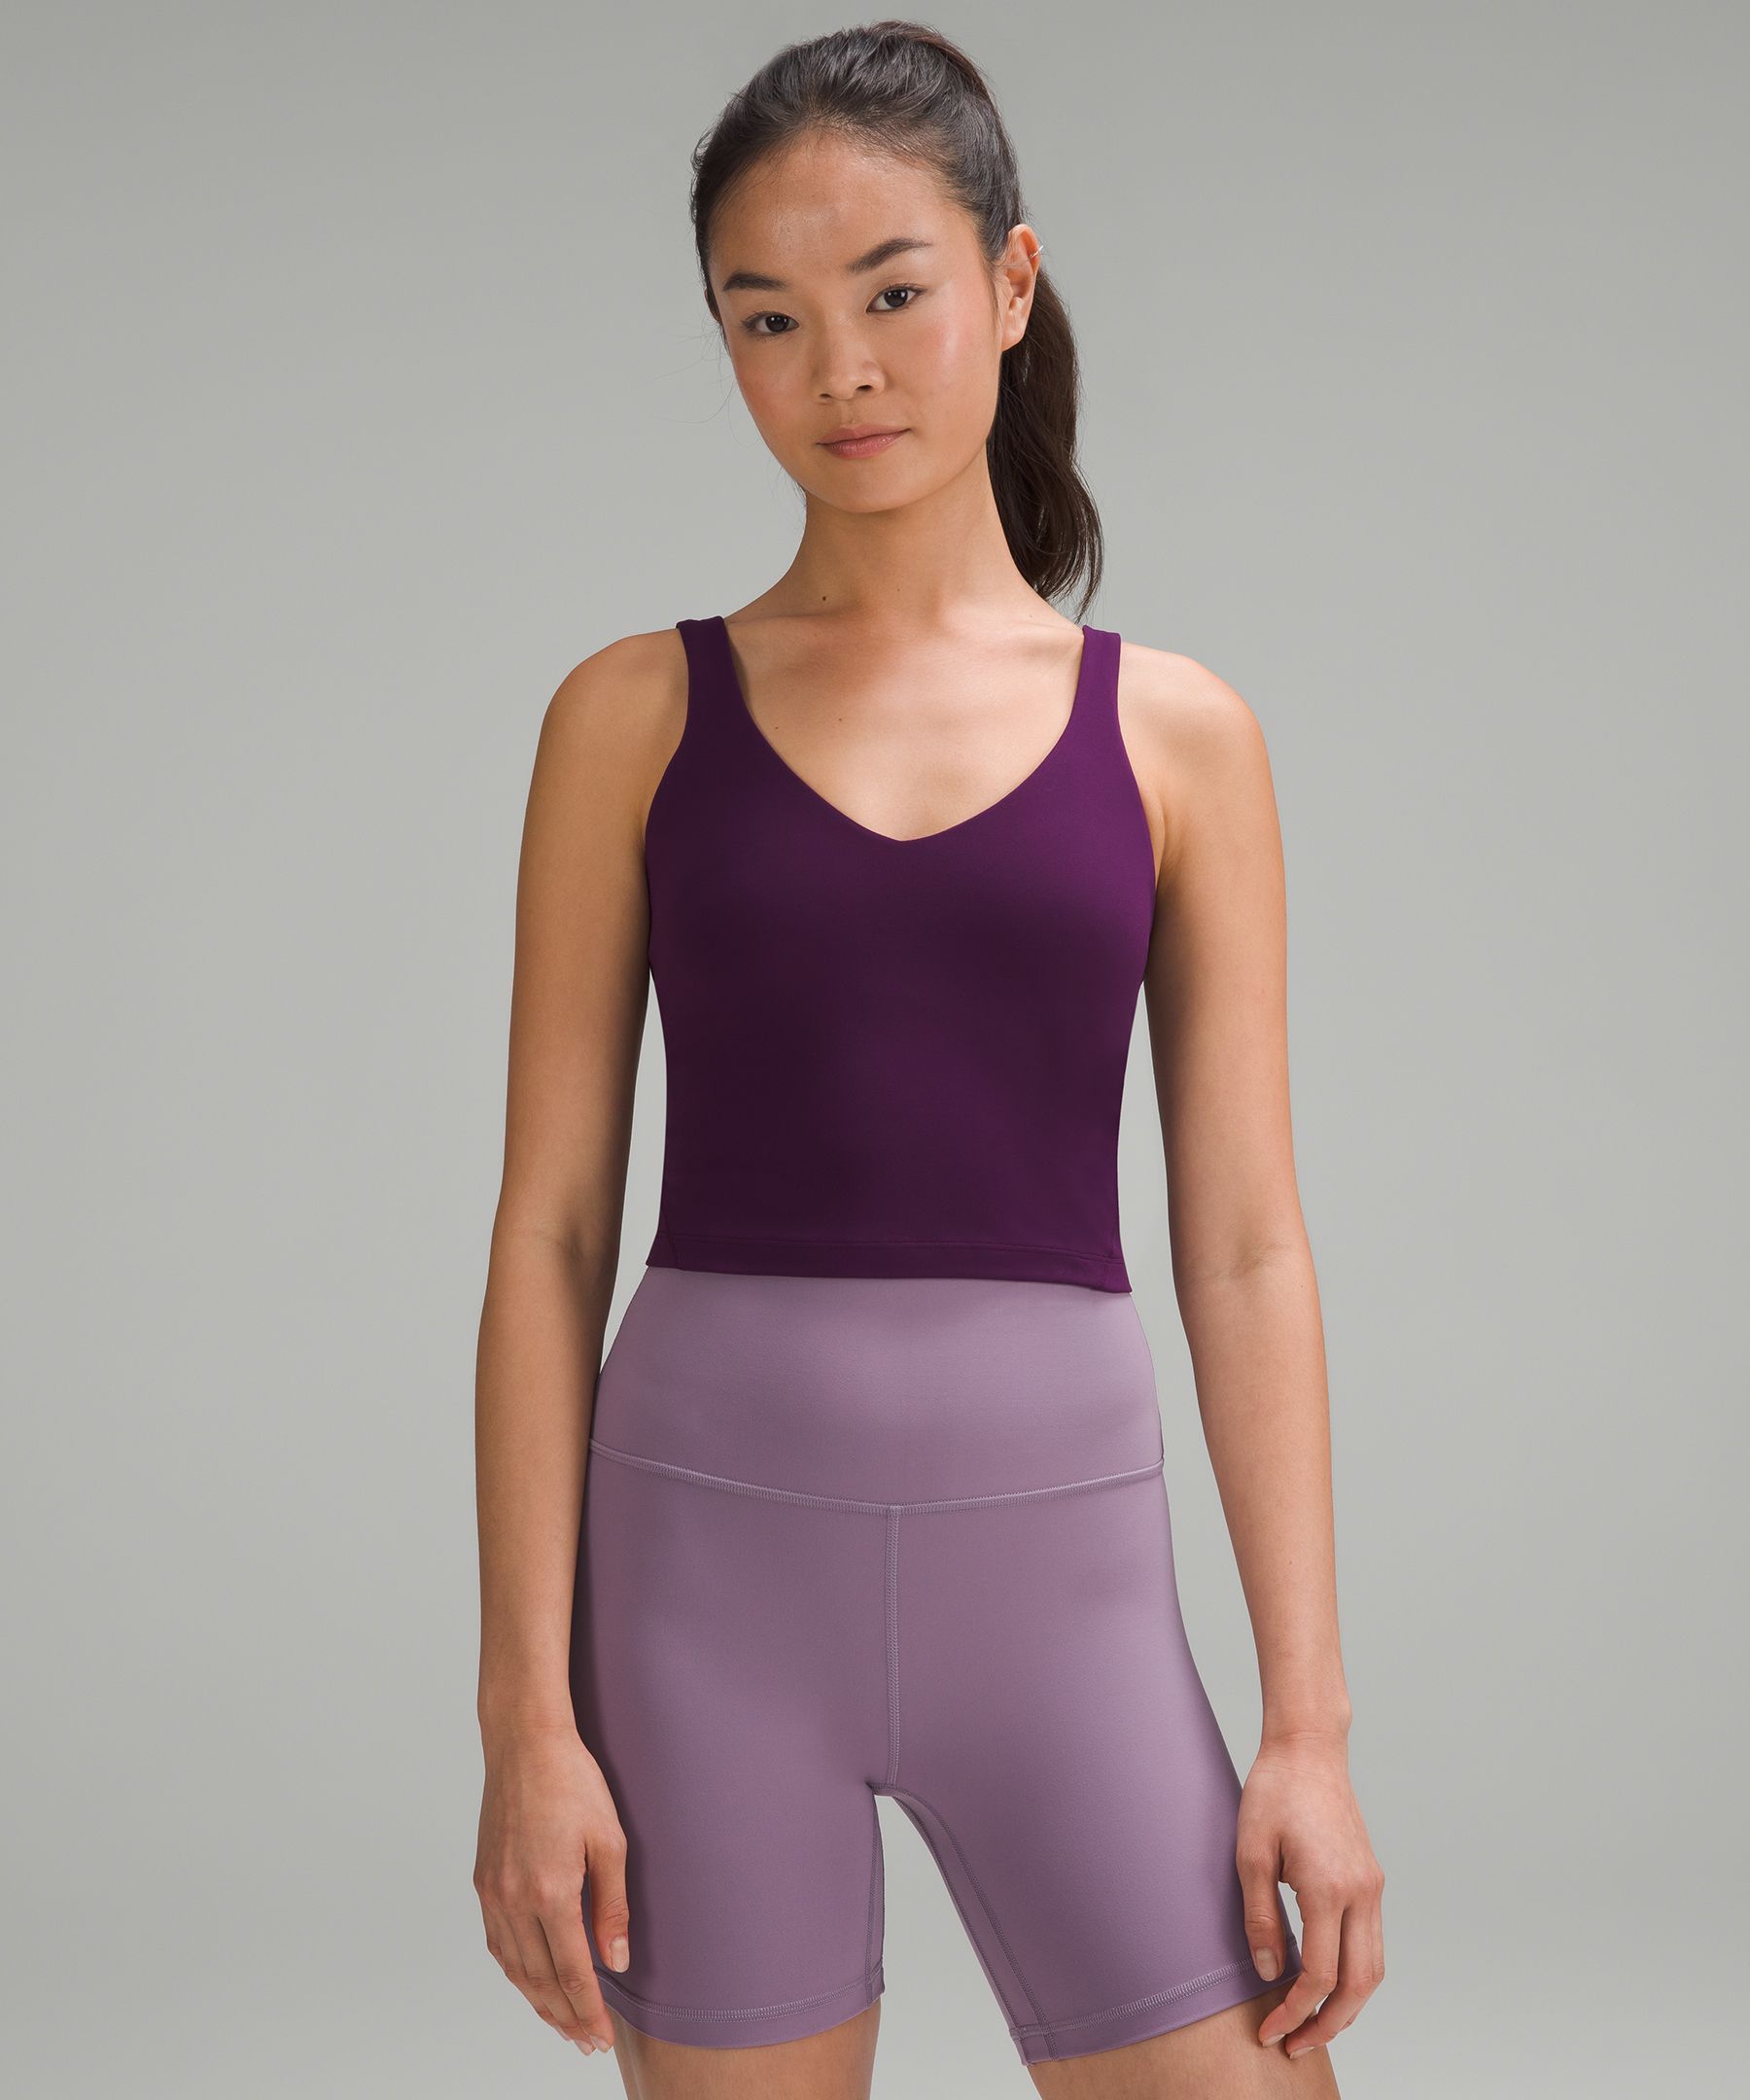 Another lululemon try on! This time im trying on the align tank in